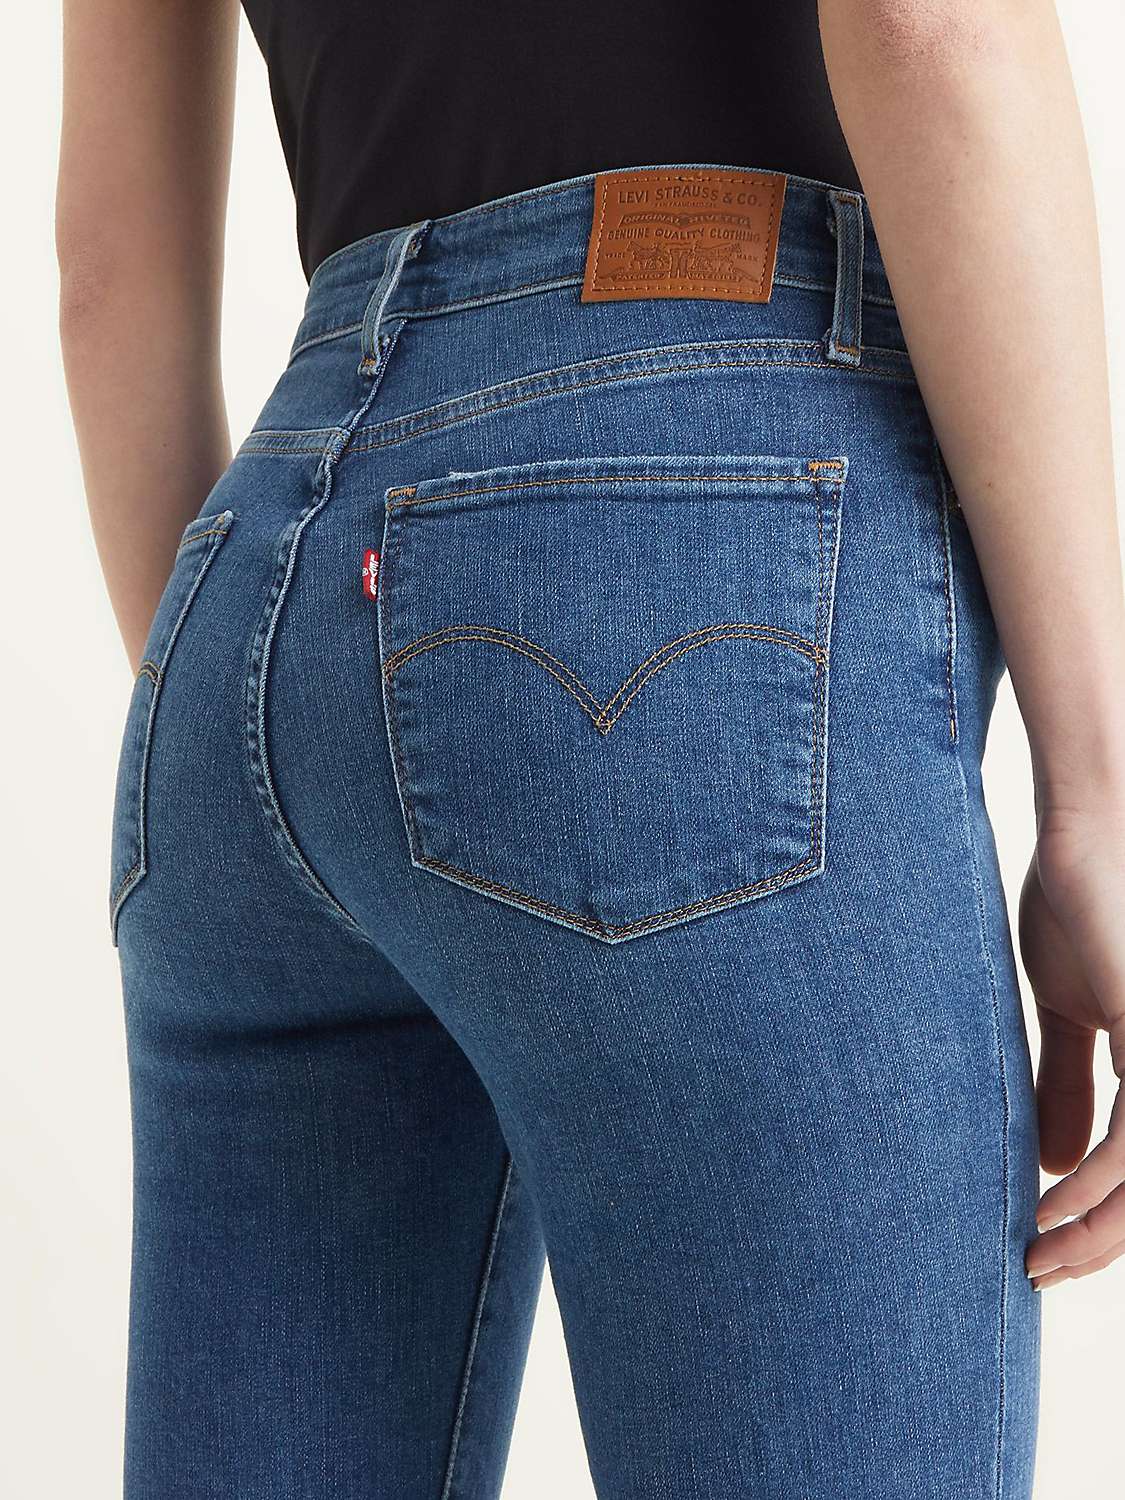 Levi's 725 High Rise Boot Cut Jeans, Blow Your Mind at John Lewis & Partners